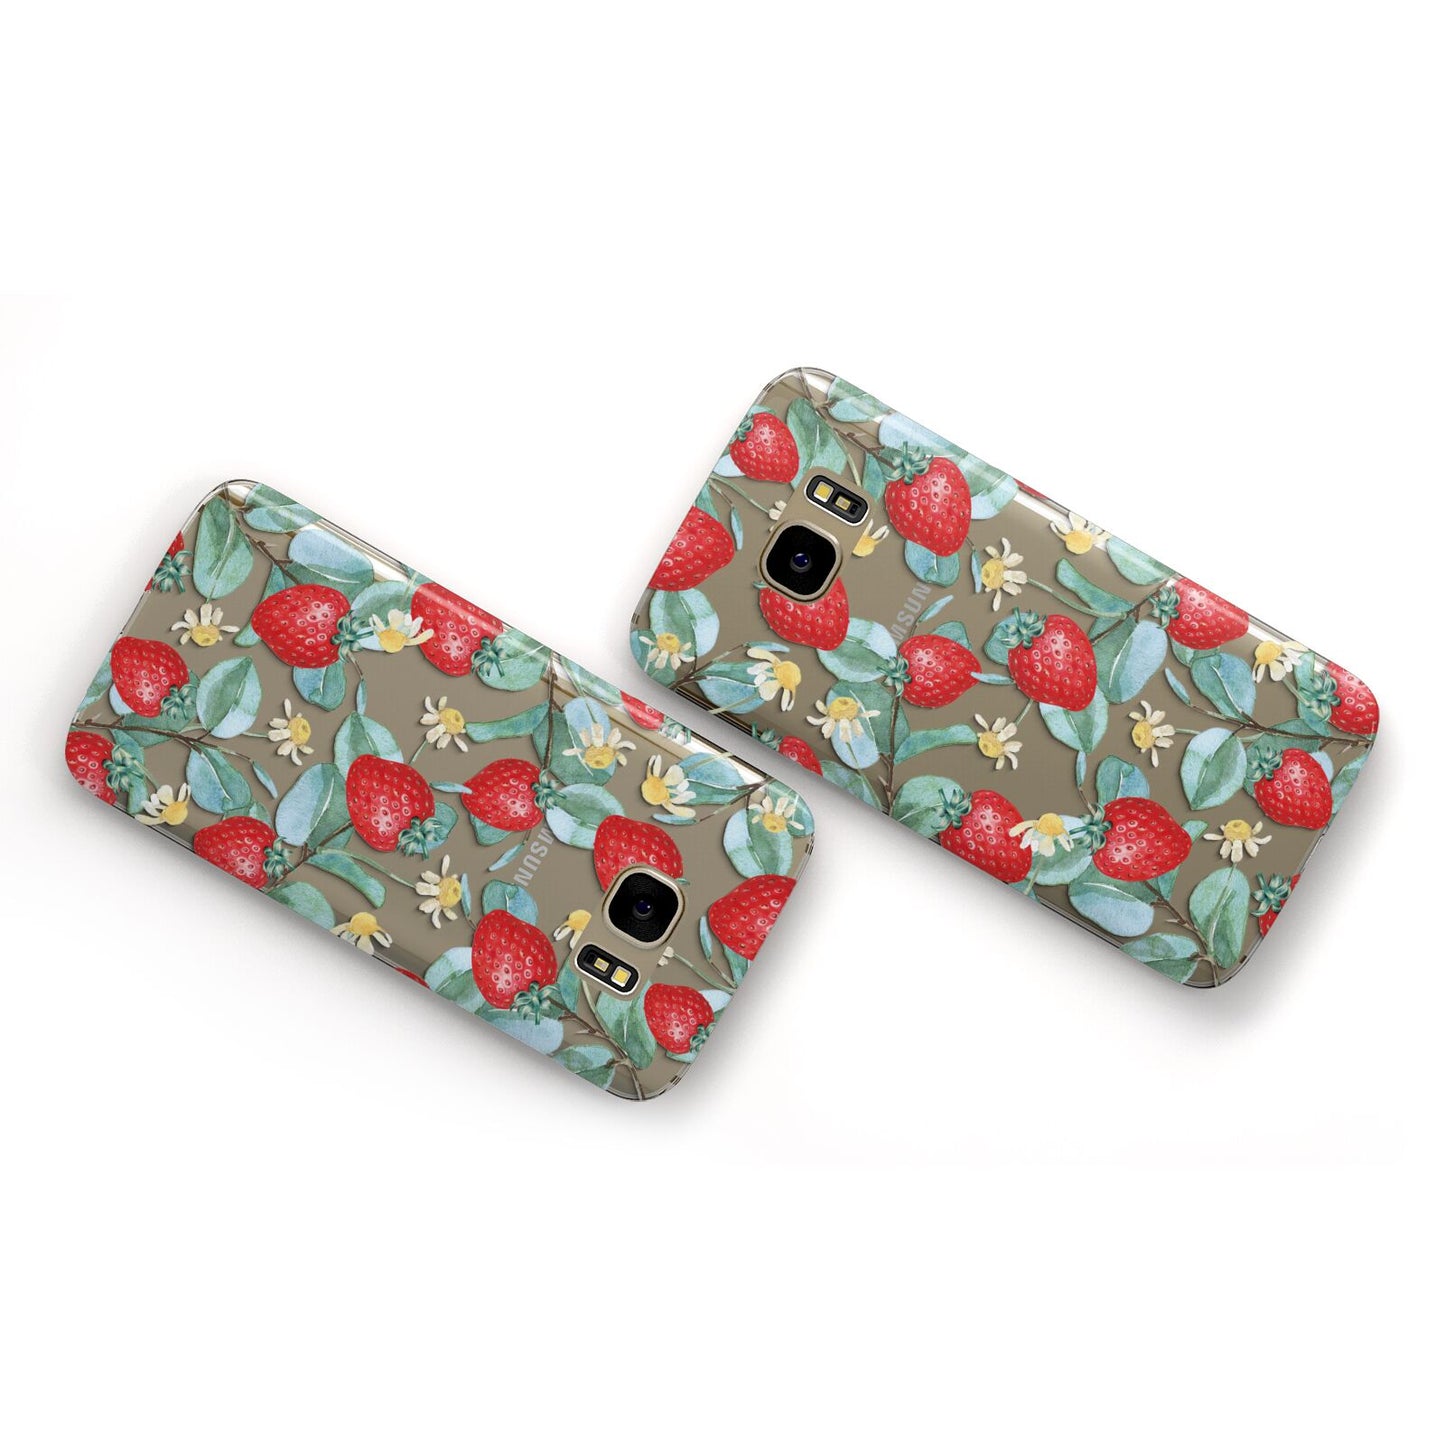 Strawberry Plant Samsung Galaxy Case Flat Overview